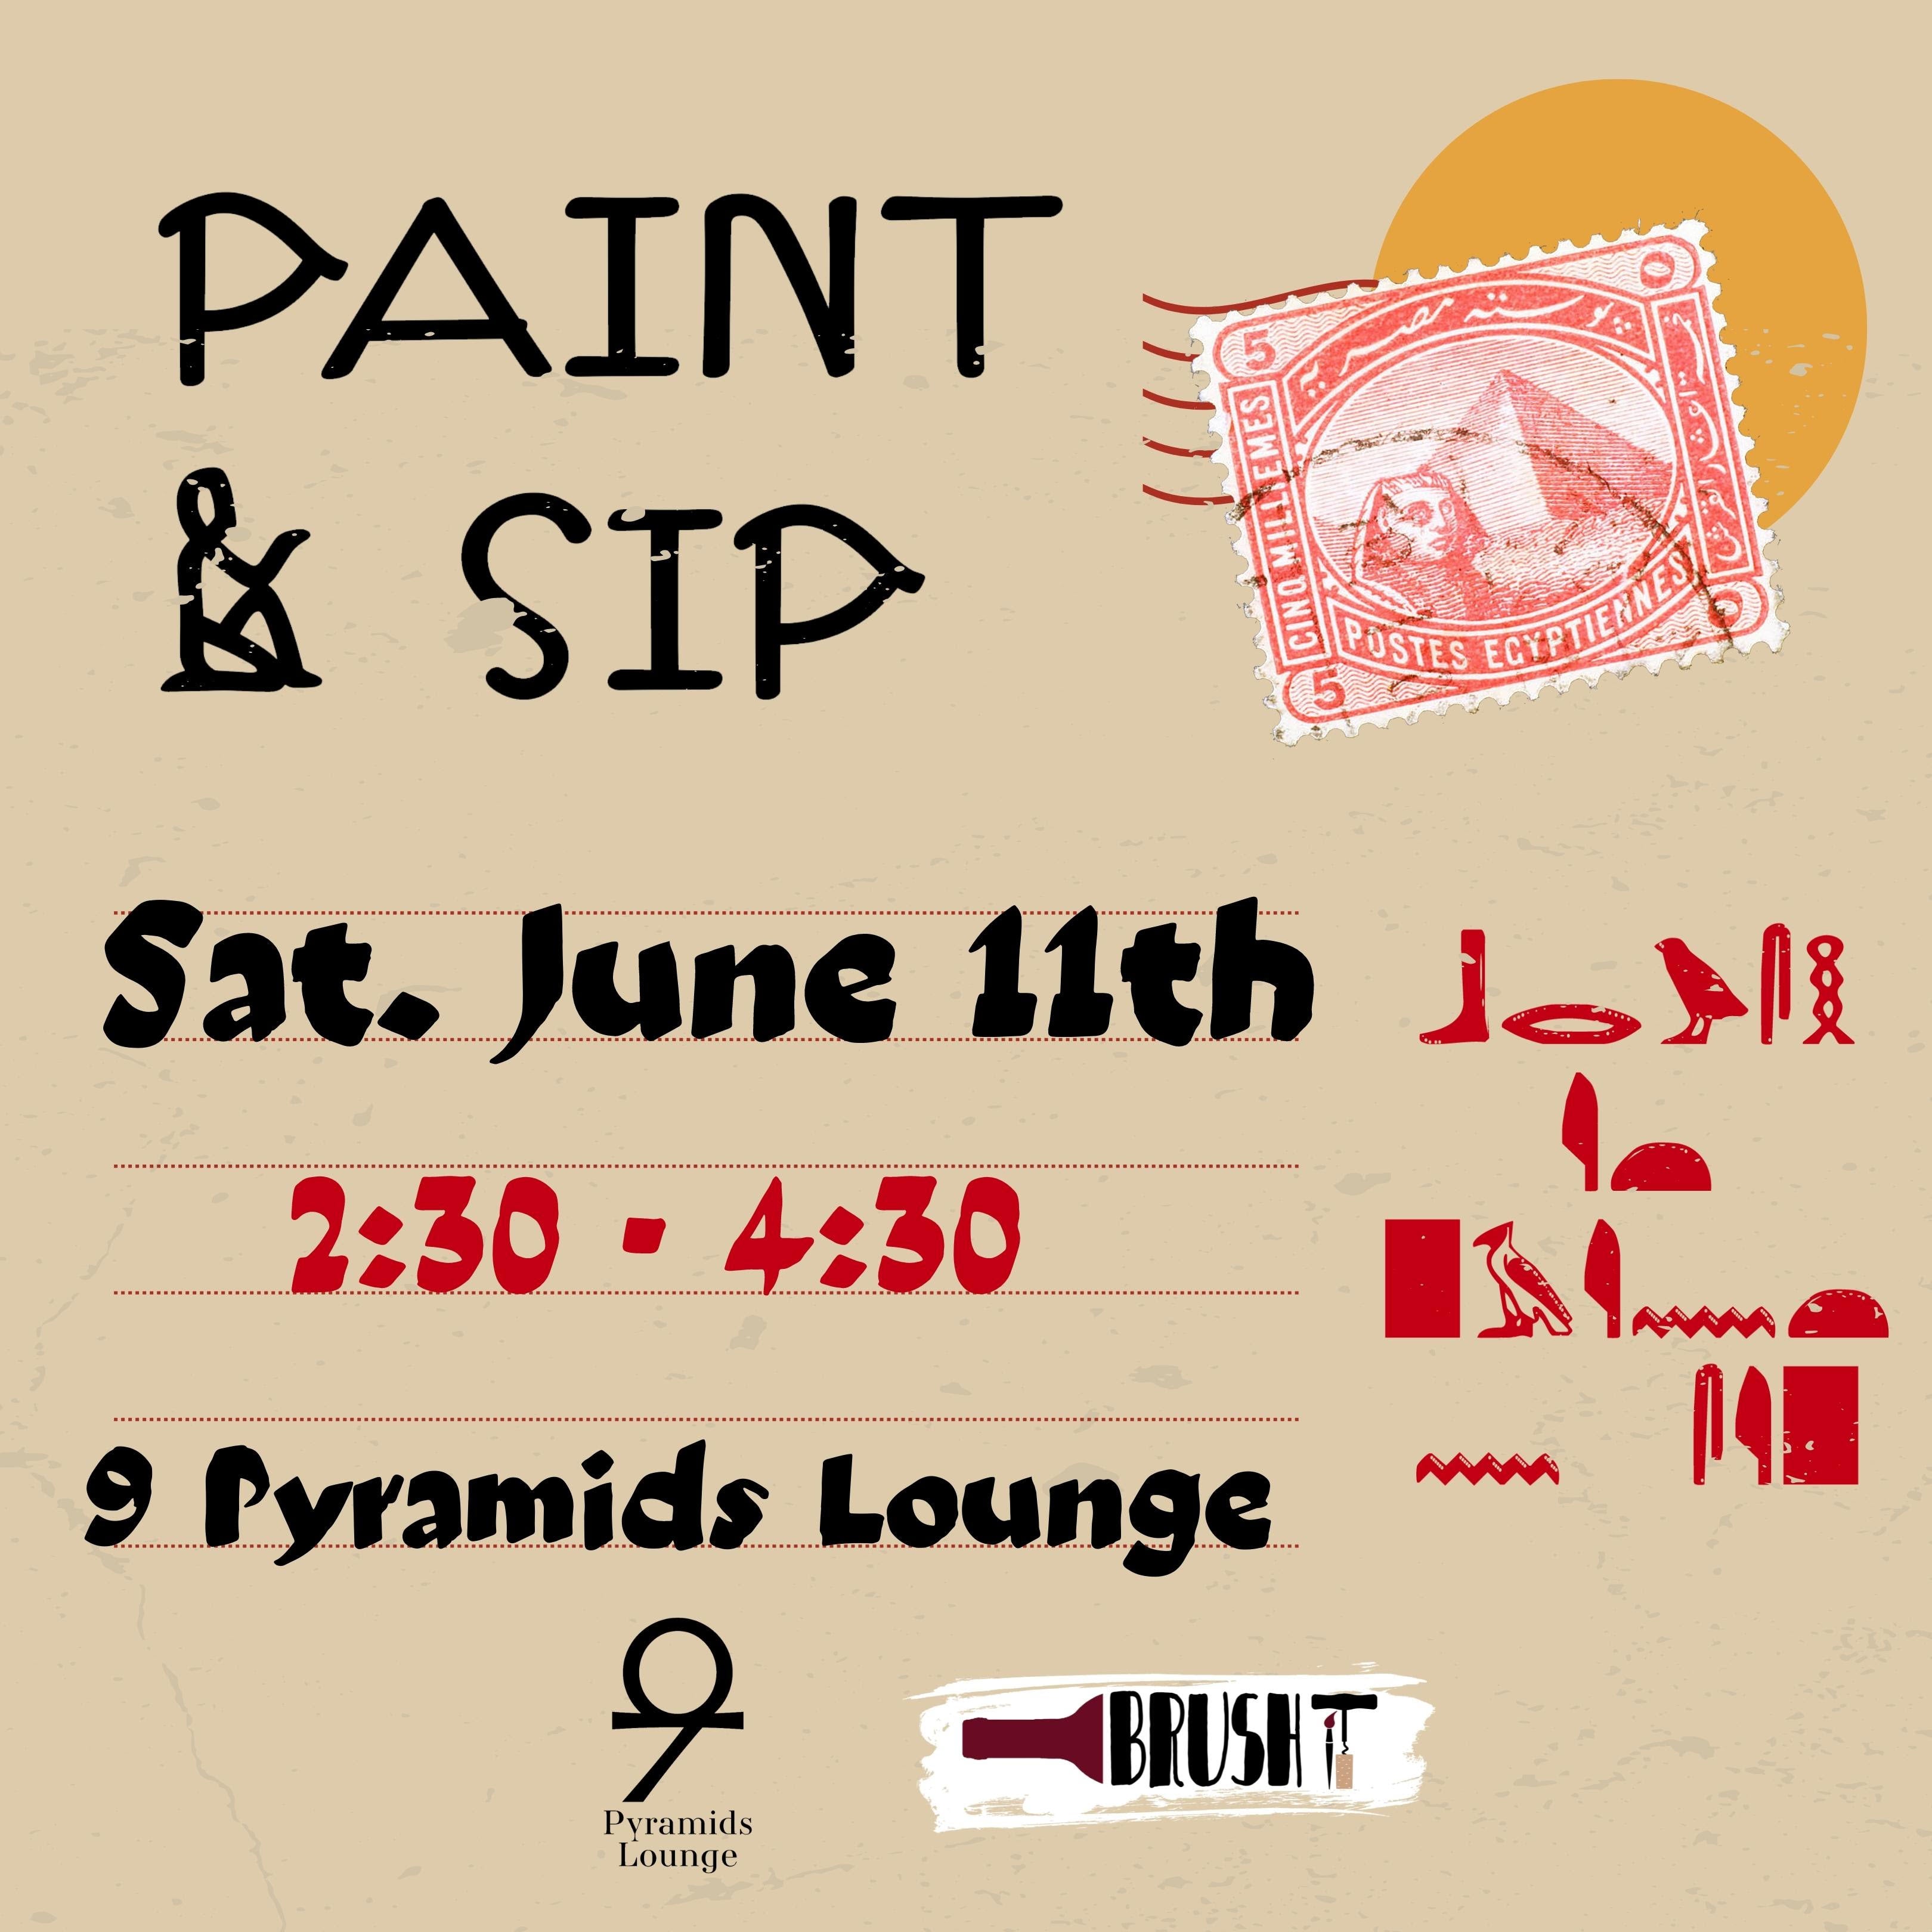 SATURDAY, June 11th - 2:30 pm - 4:30 pm - 9 PYRAMIDS LOUNGE - BY THE PYRAMIDS